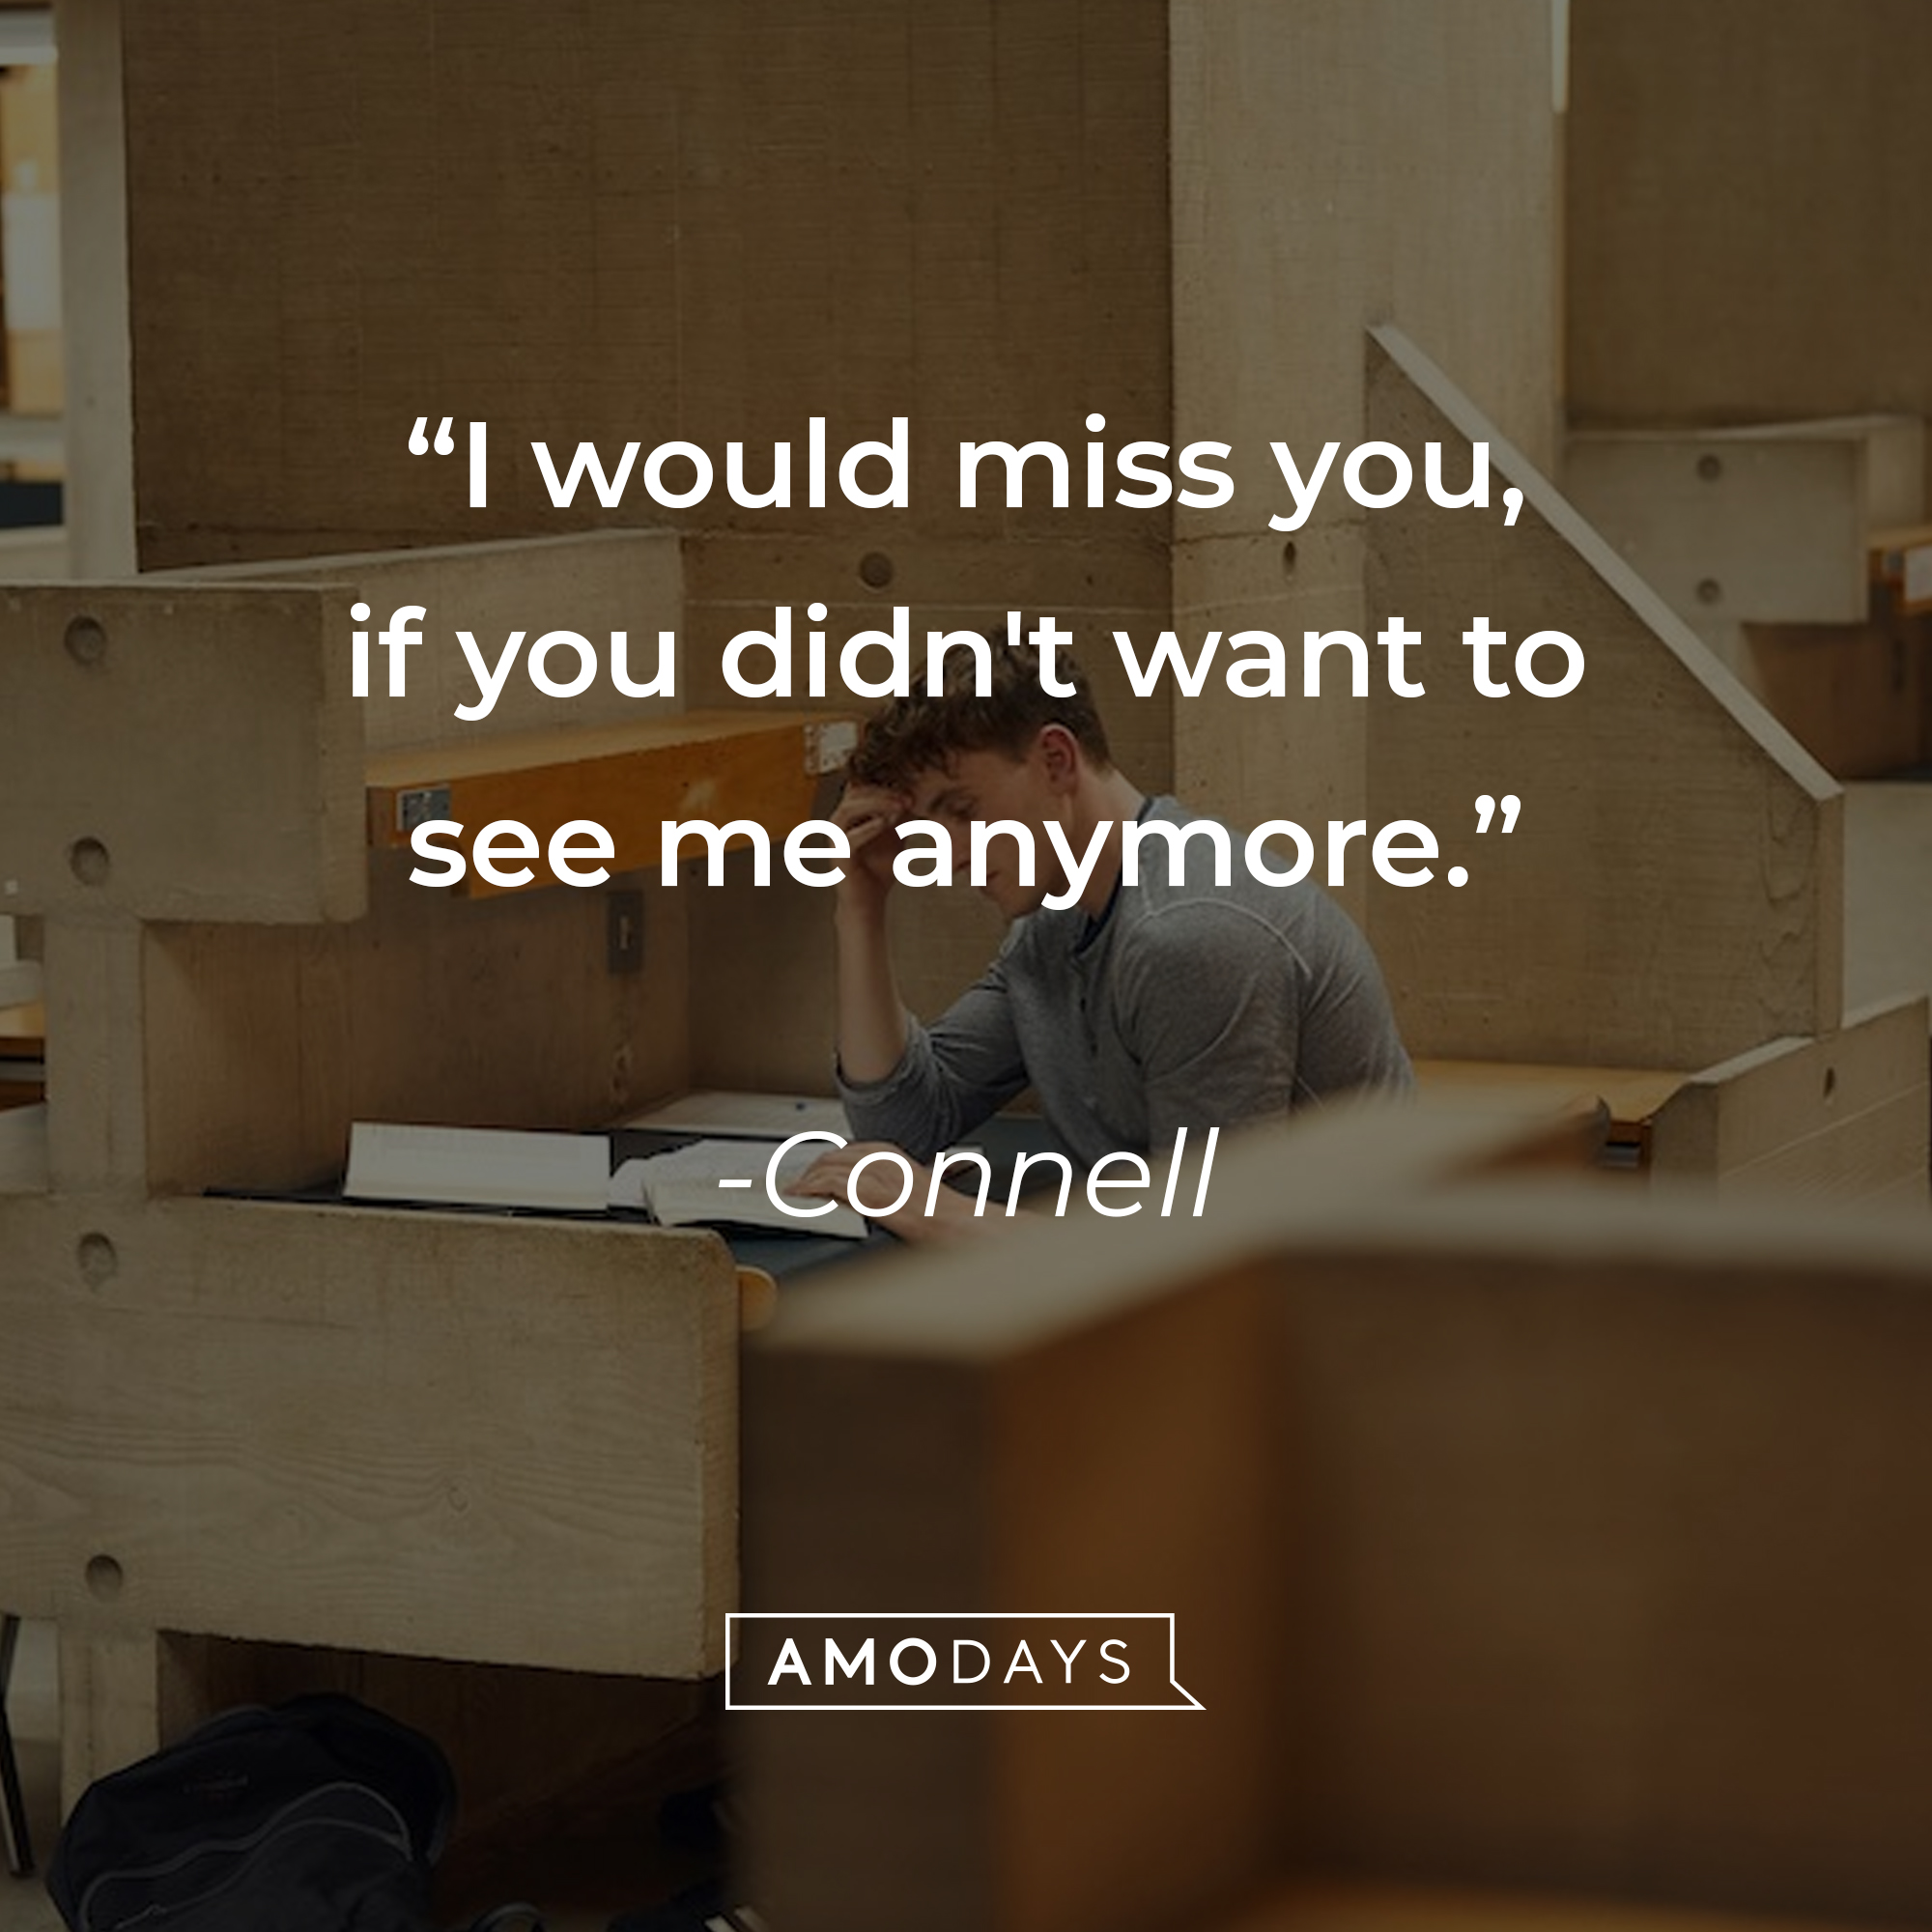 Connell, with his quote: “I would miss you, if you didn't want to see me anymore.” |Source: facebook.com/normalpeoplebbc